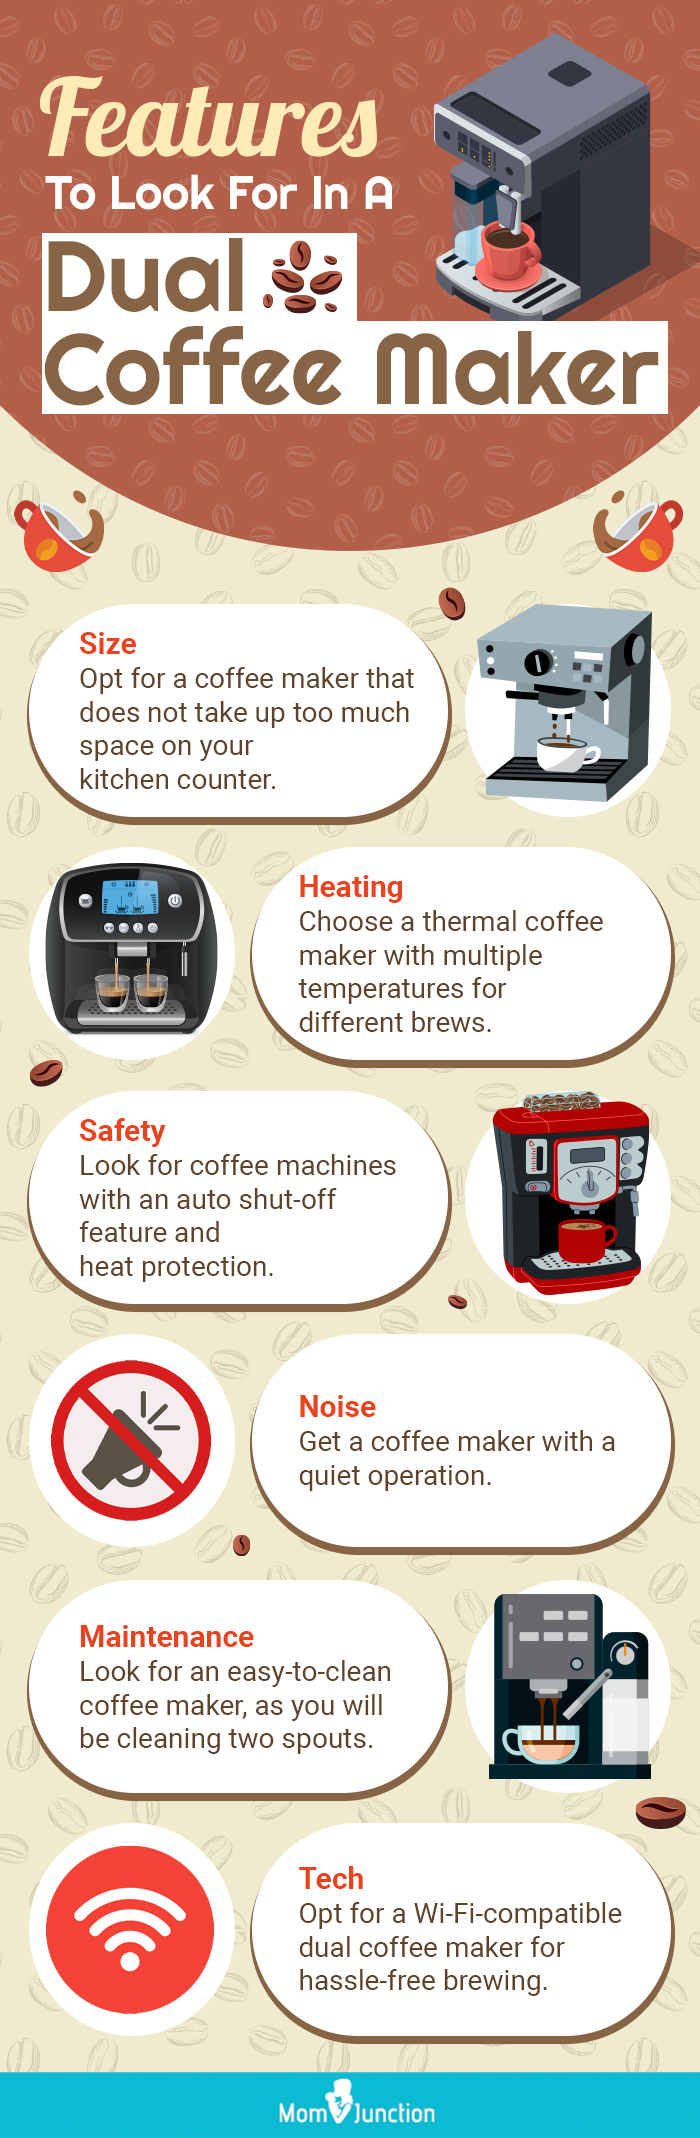 https://www.momjunction.com/wp-content/uploads/2023/01/Features-To-Look-For-In-A-Dual-Coffee-Maker.jpg